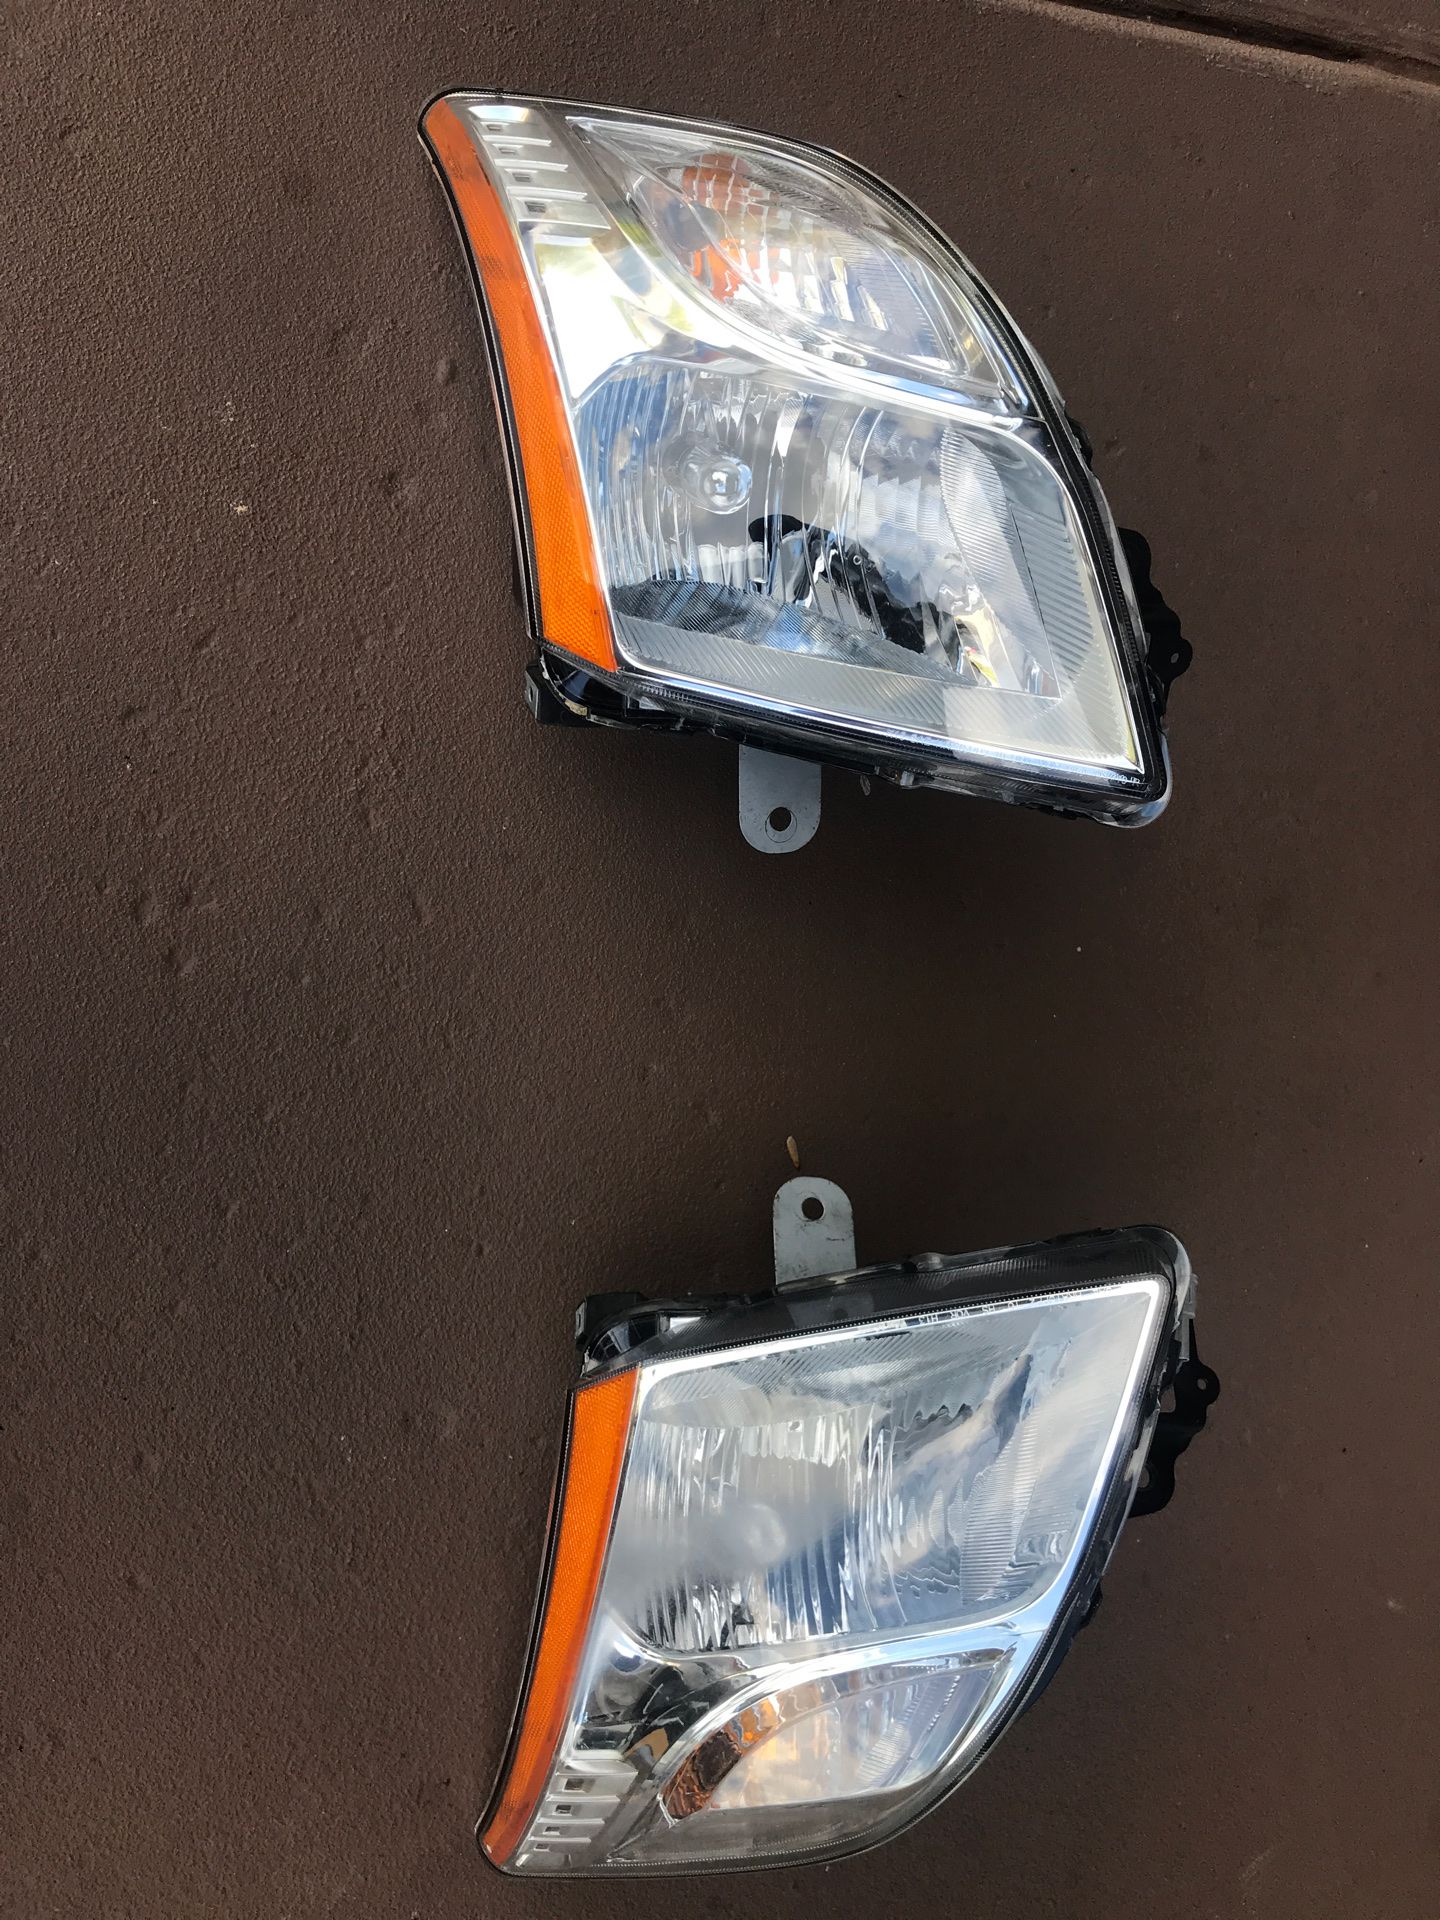 Headlights front lamp for 2010-2011 Nissan Sentra pair RH&LH fairly used